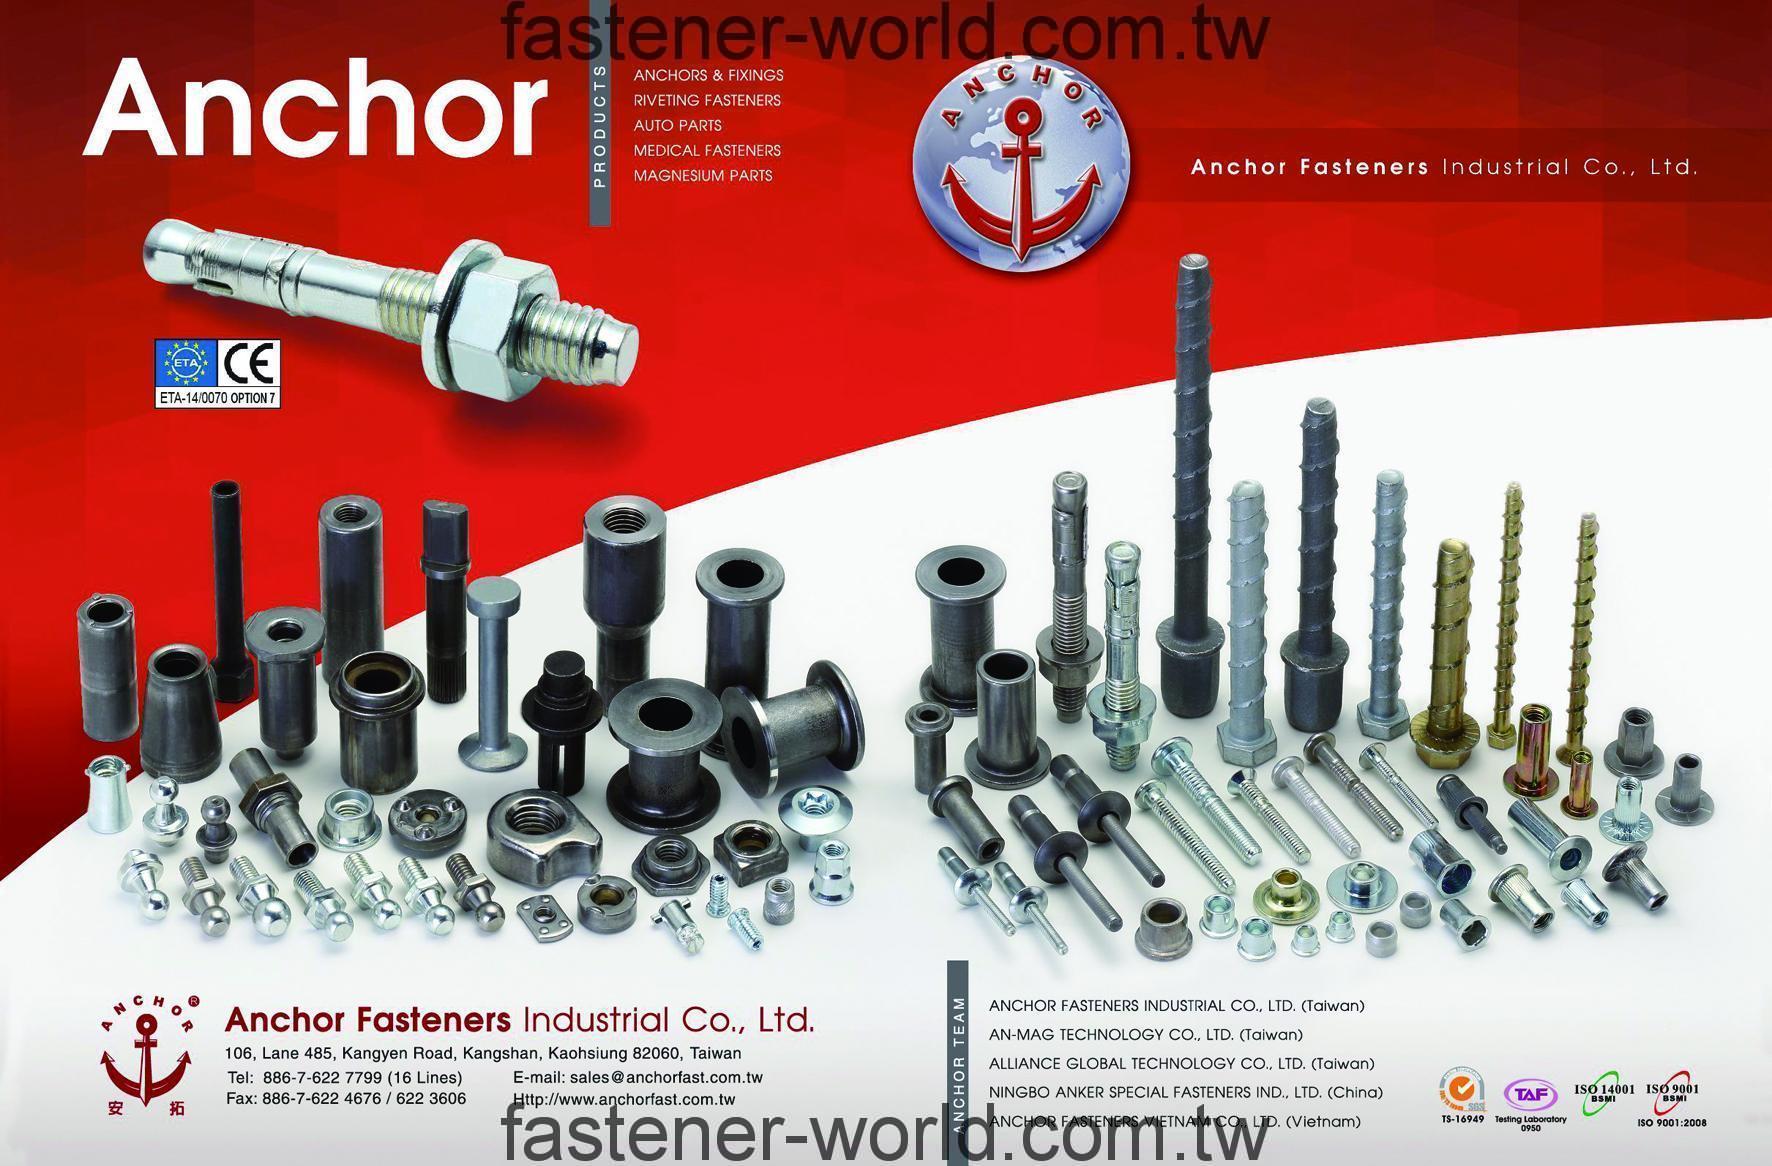 ANCHOR FASTENERS INDUSTRIAL CO., LTD. _Online Catalogues